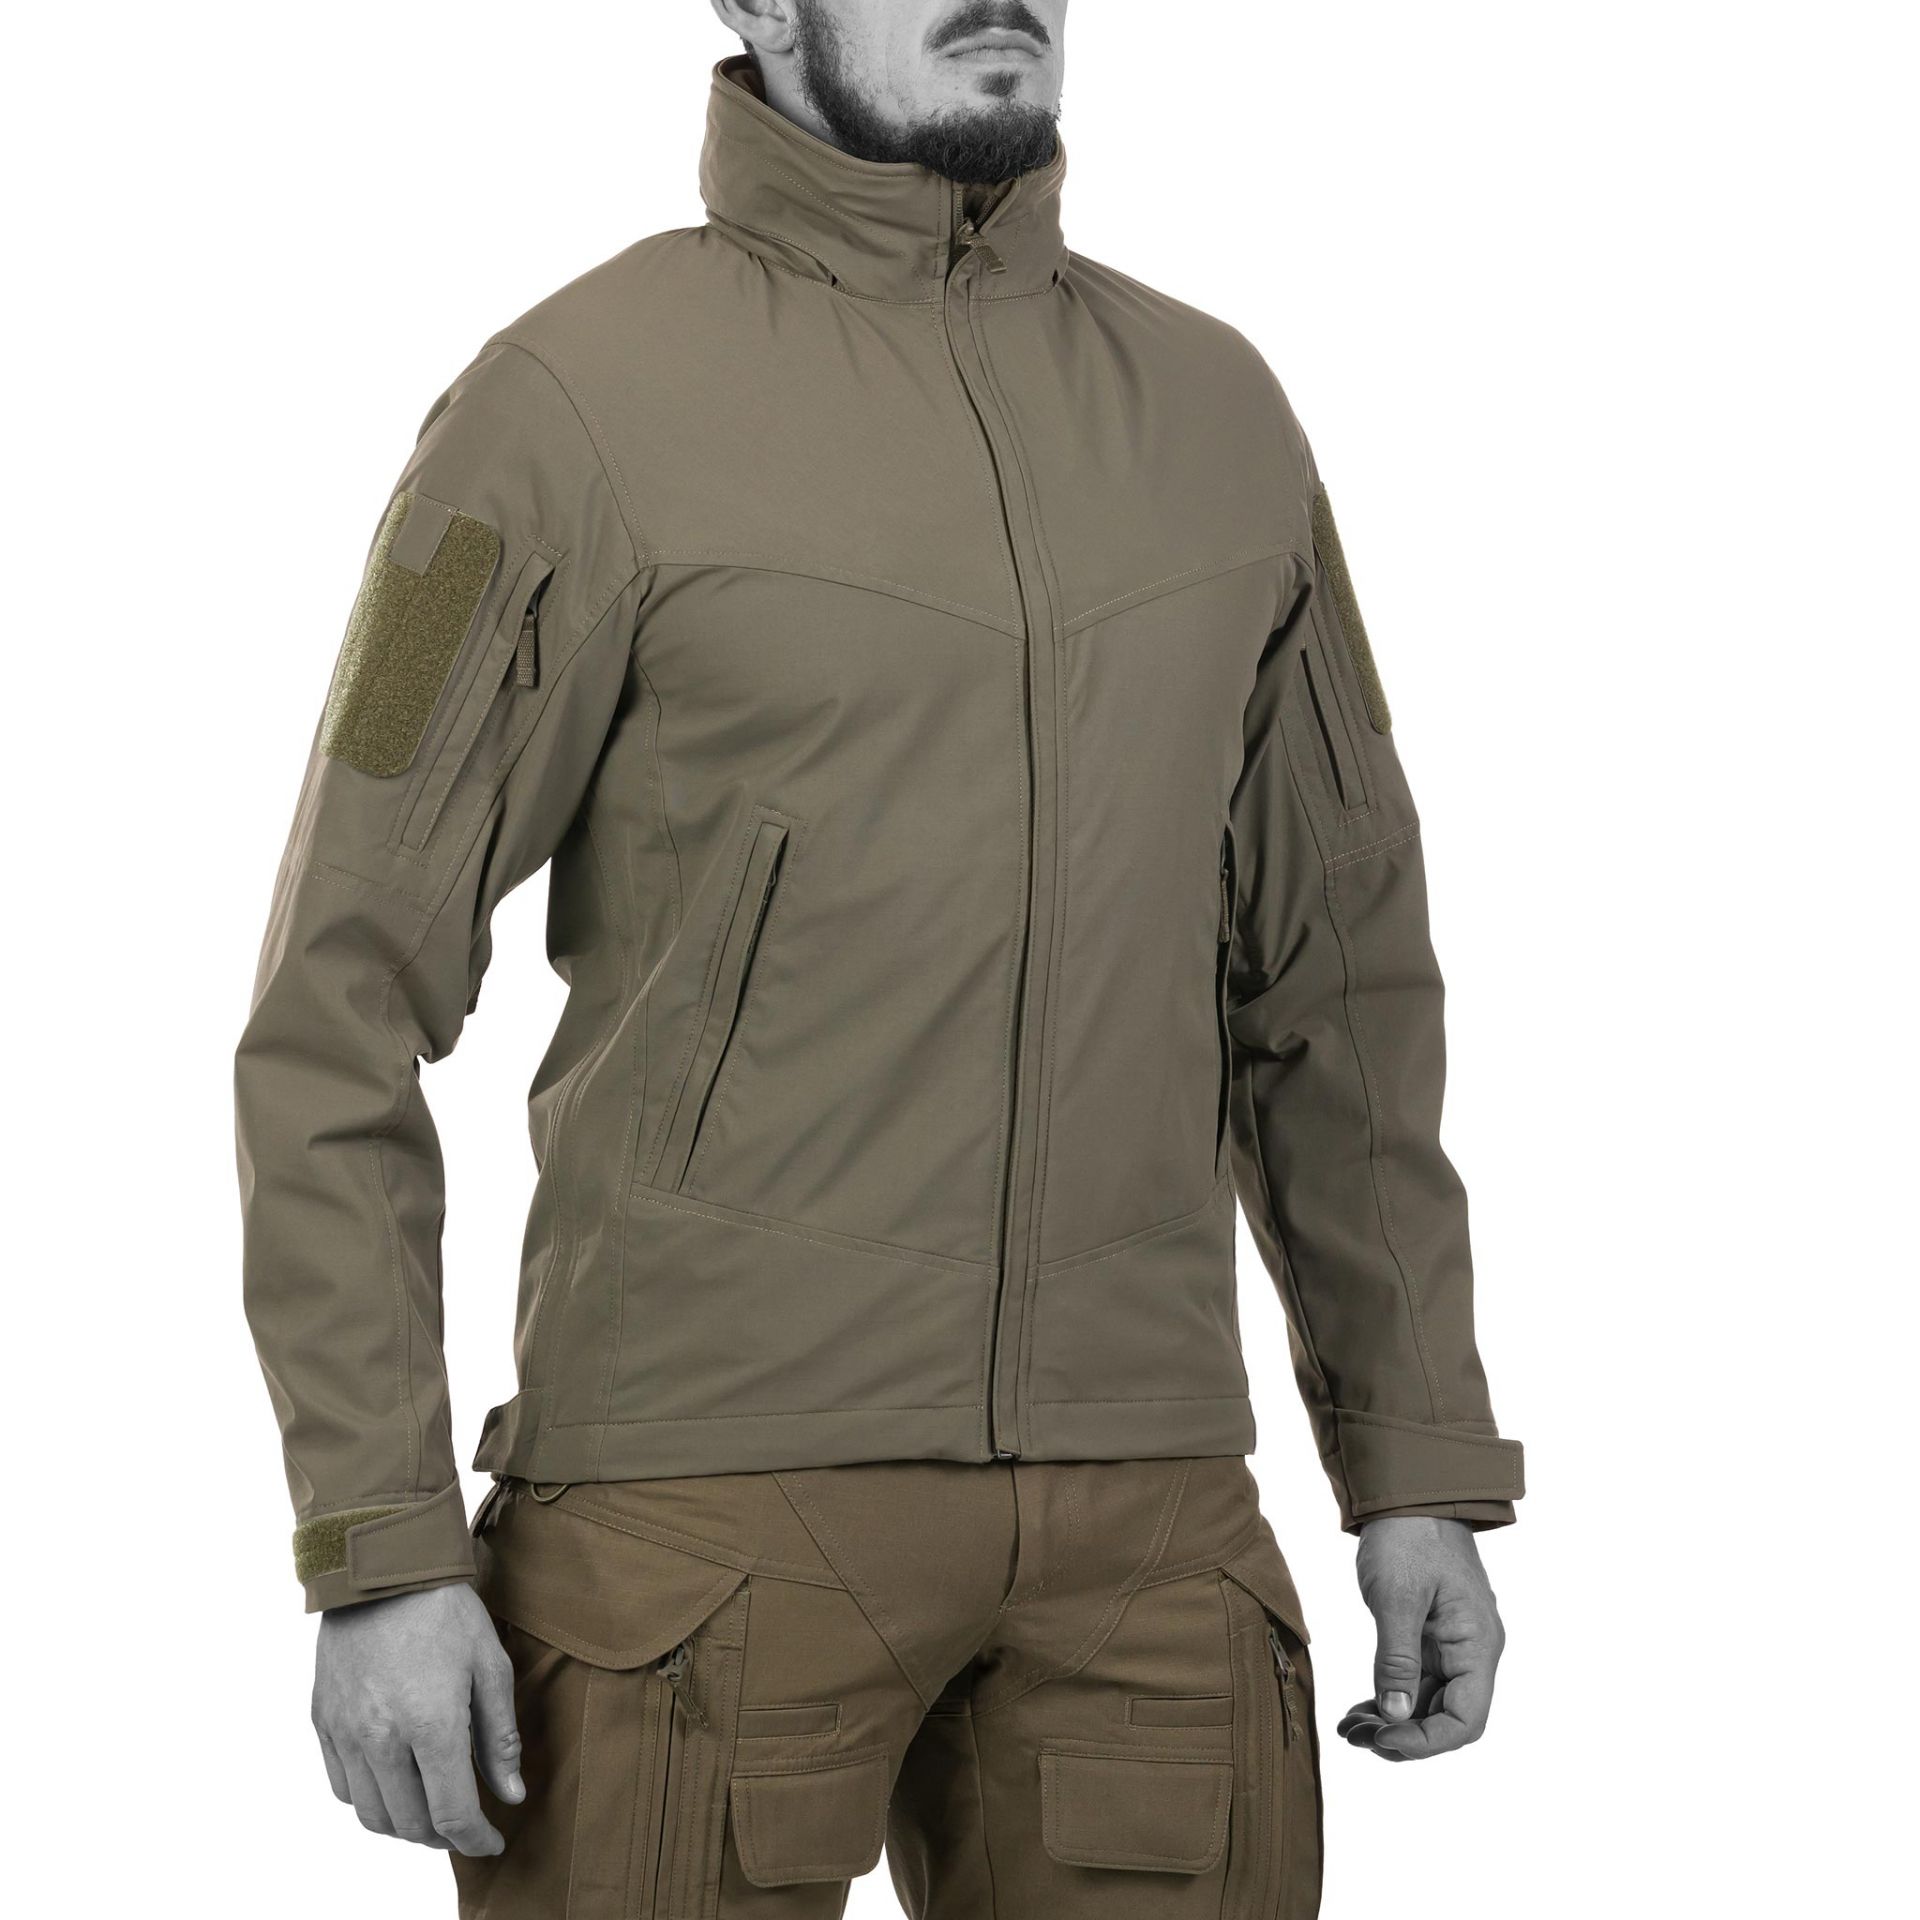 Soft Shell or Hard Shell Jackets: What are the Differences?